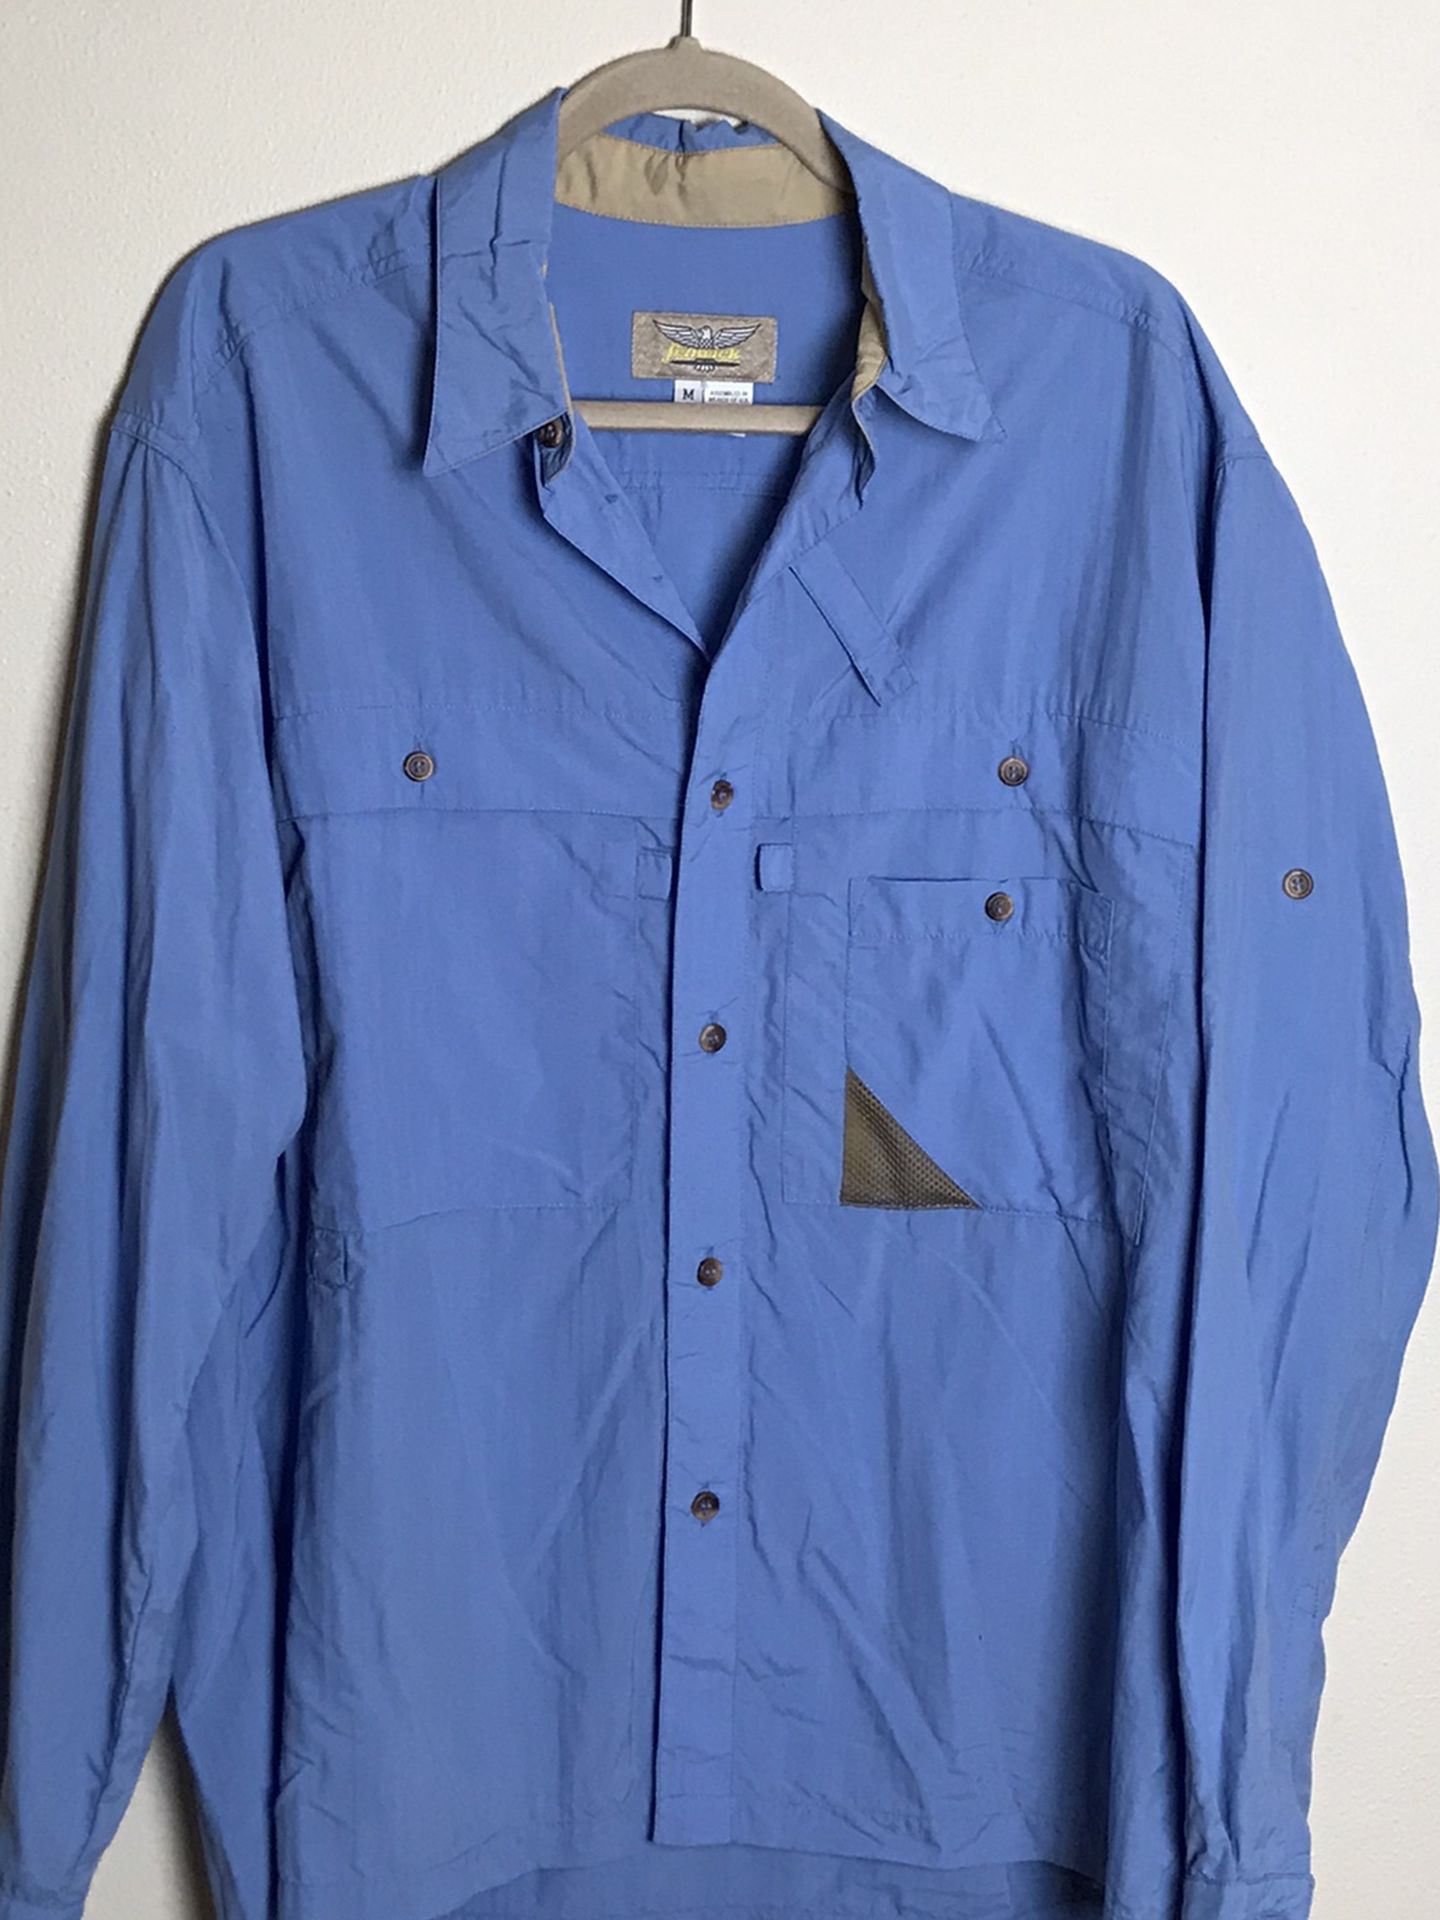 fenwick Mens vented PFG fishing Button up shirt Size M Gently used